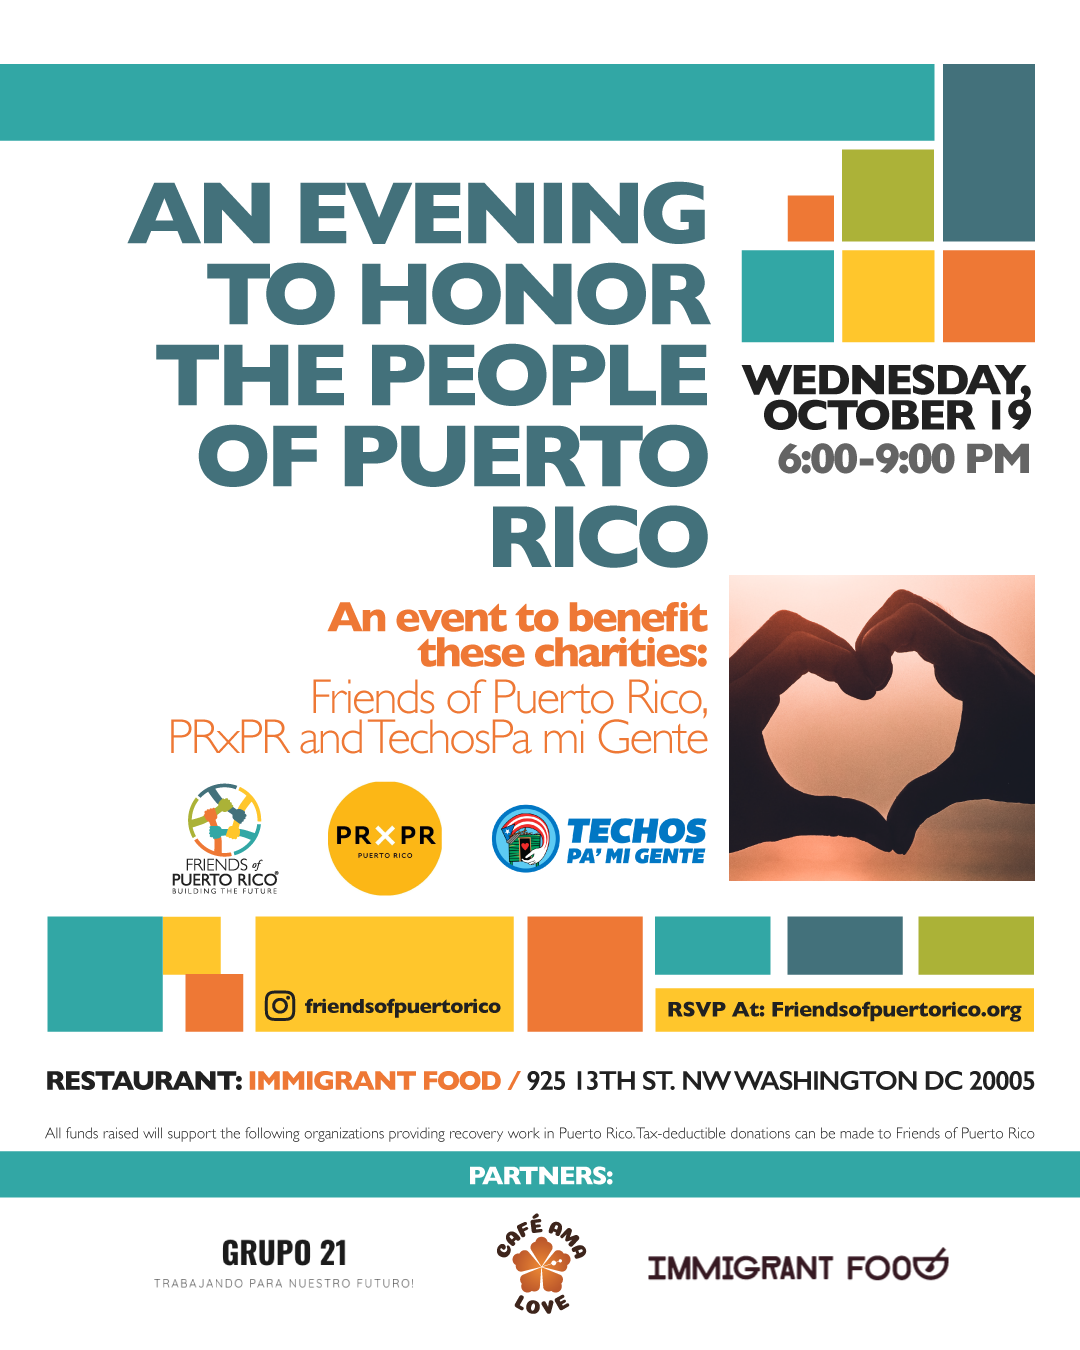 An Evening to Honor the People of Puerto Rico